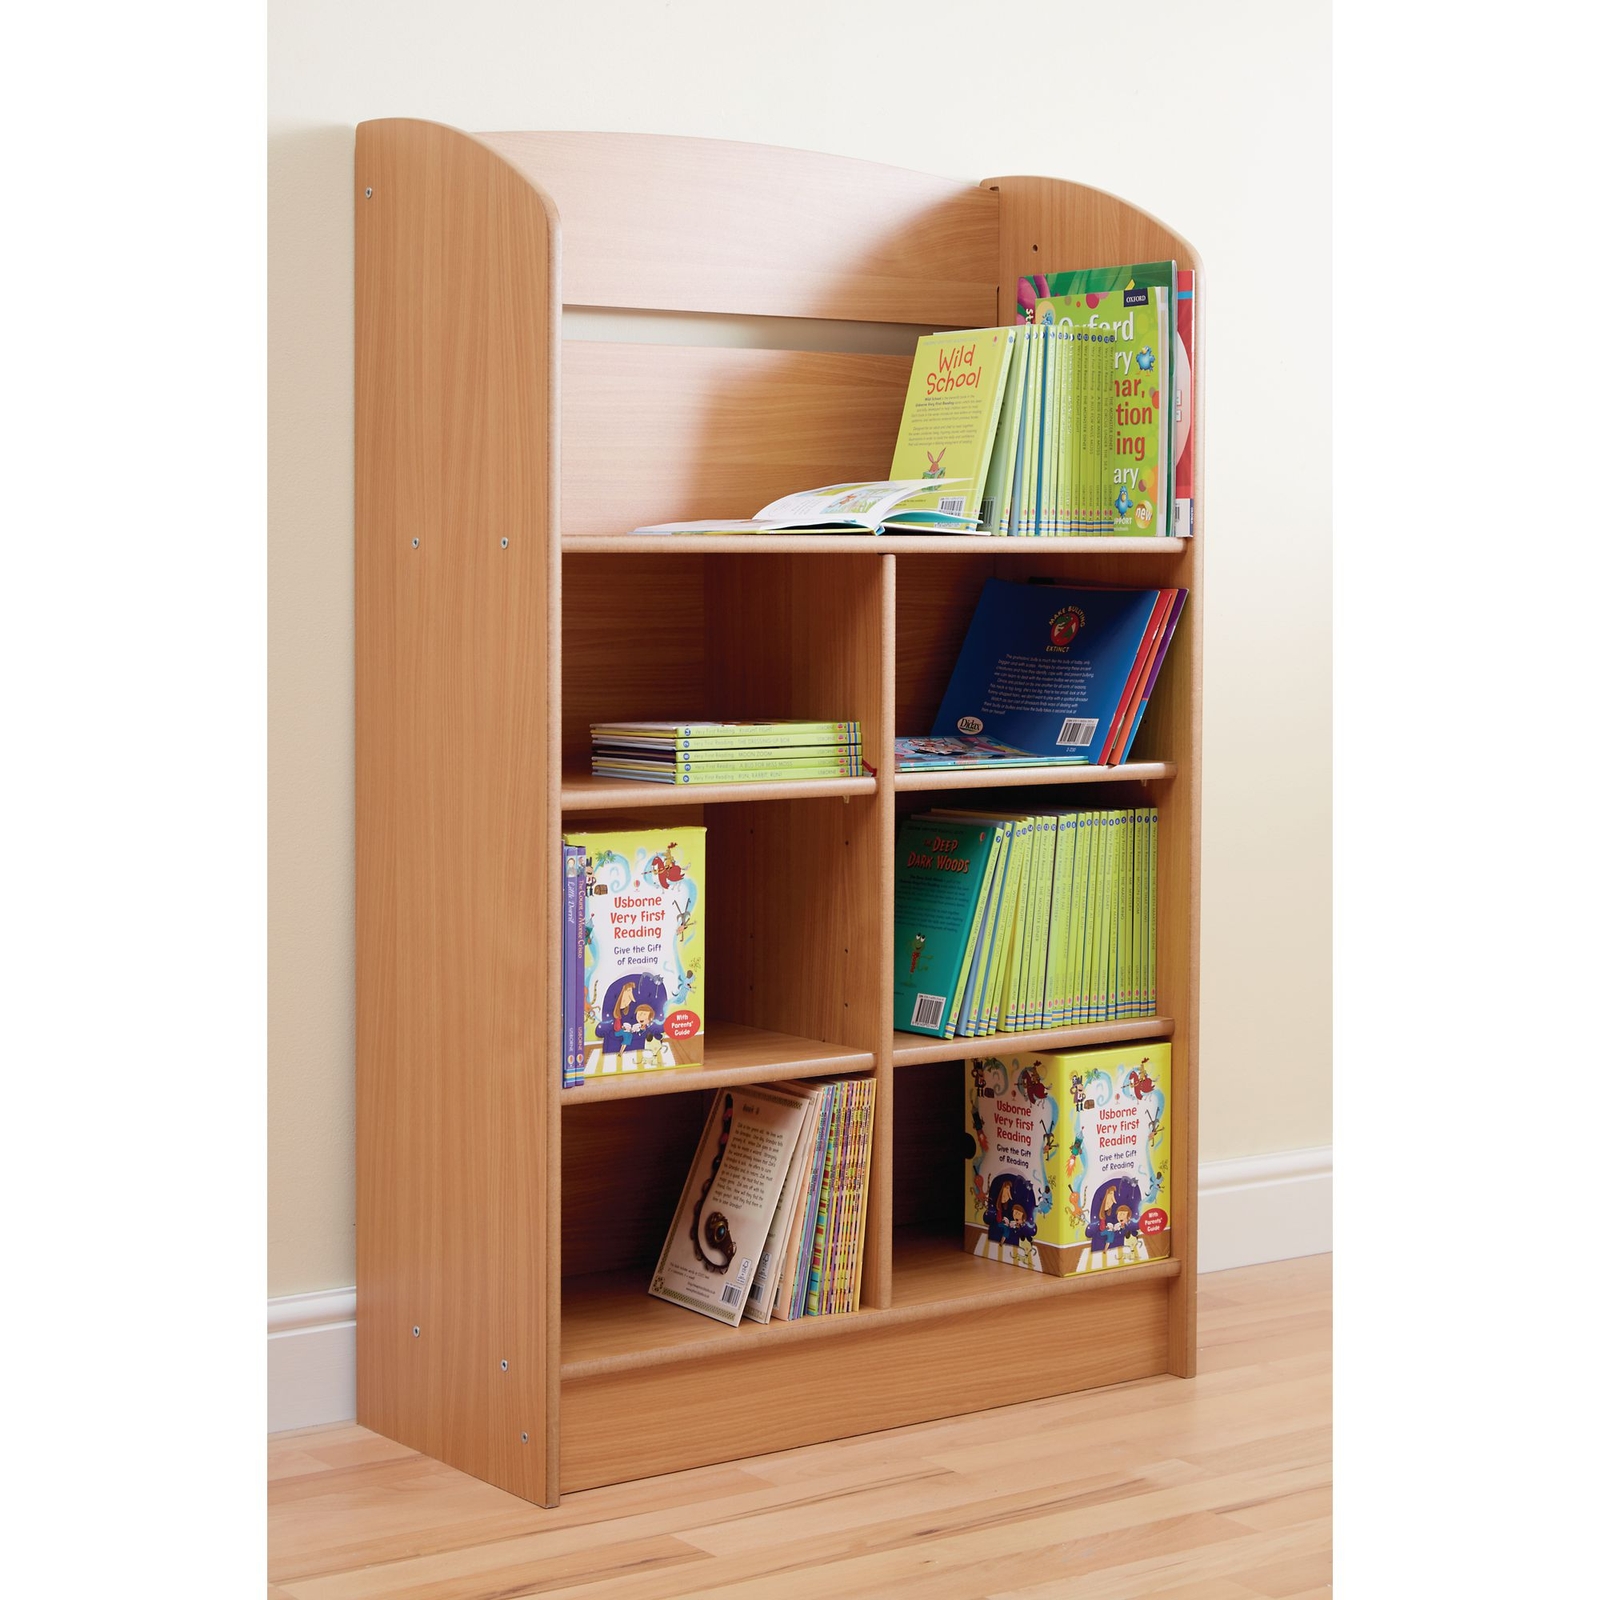 Display Bookcases - Beech